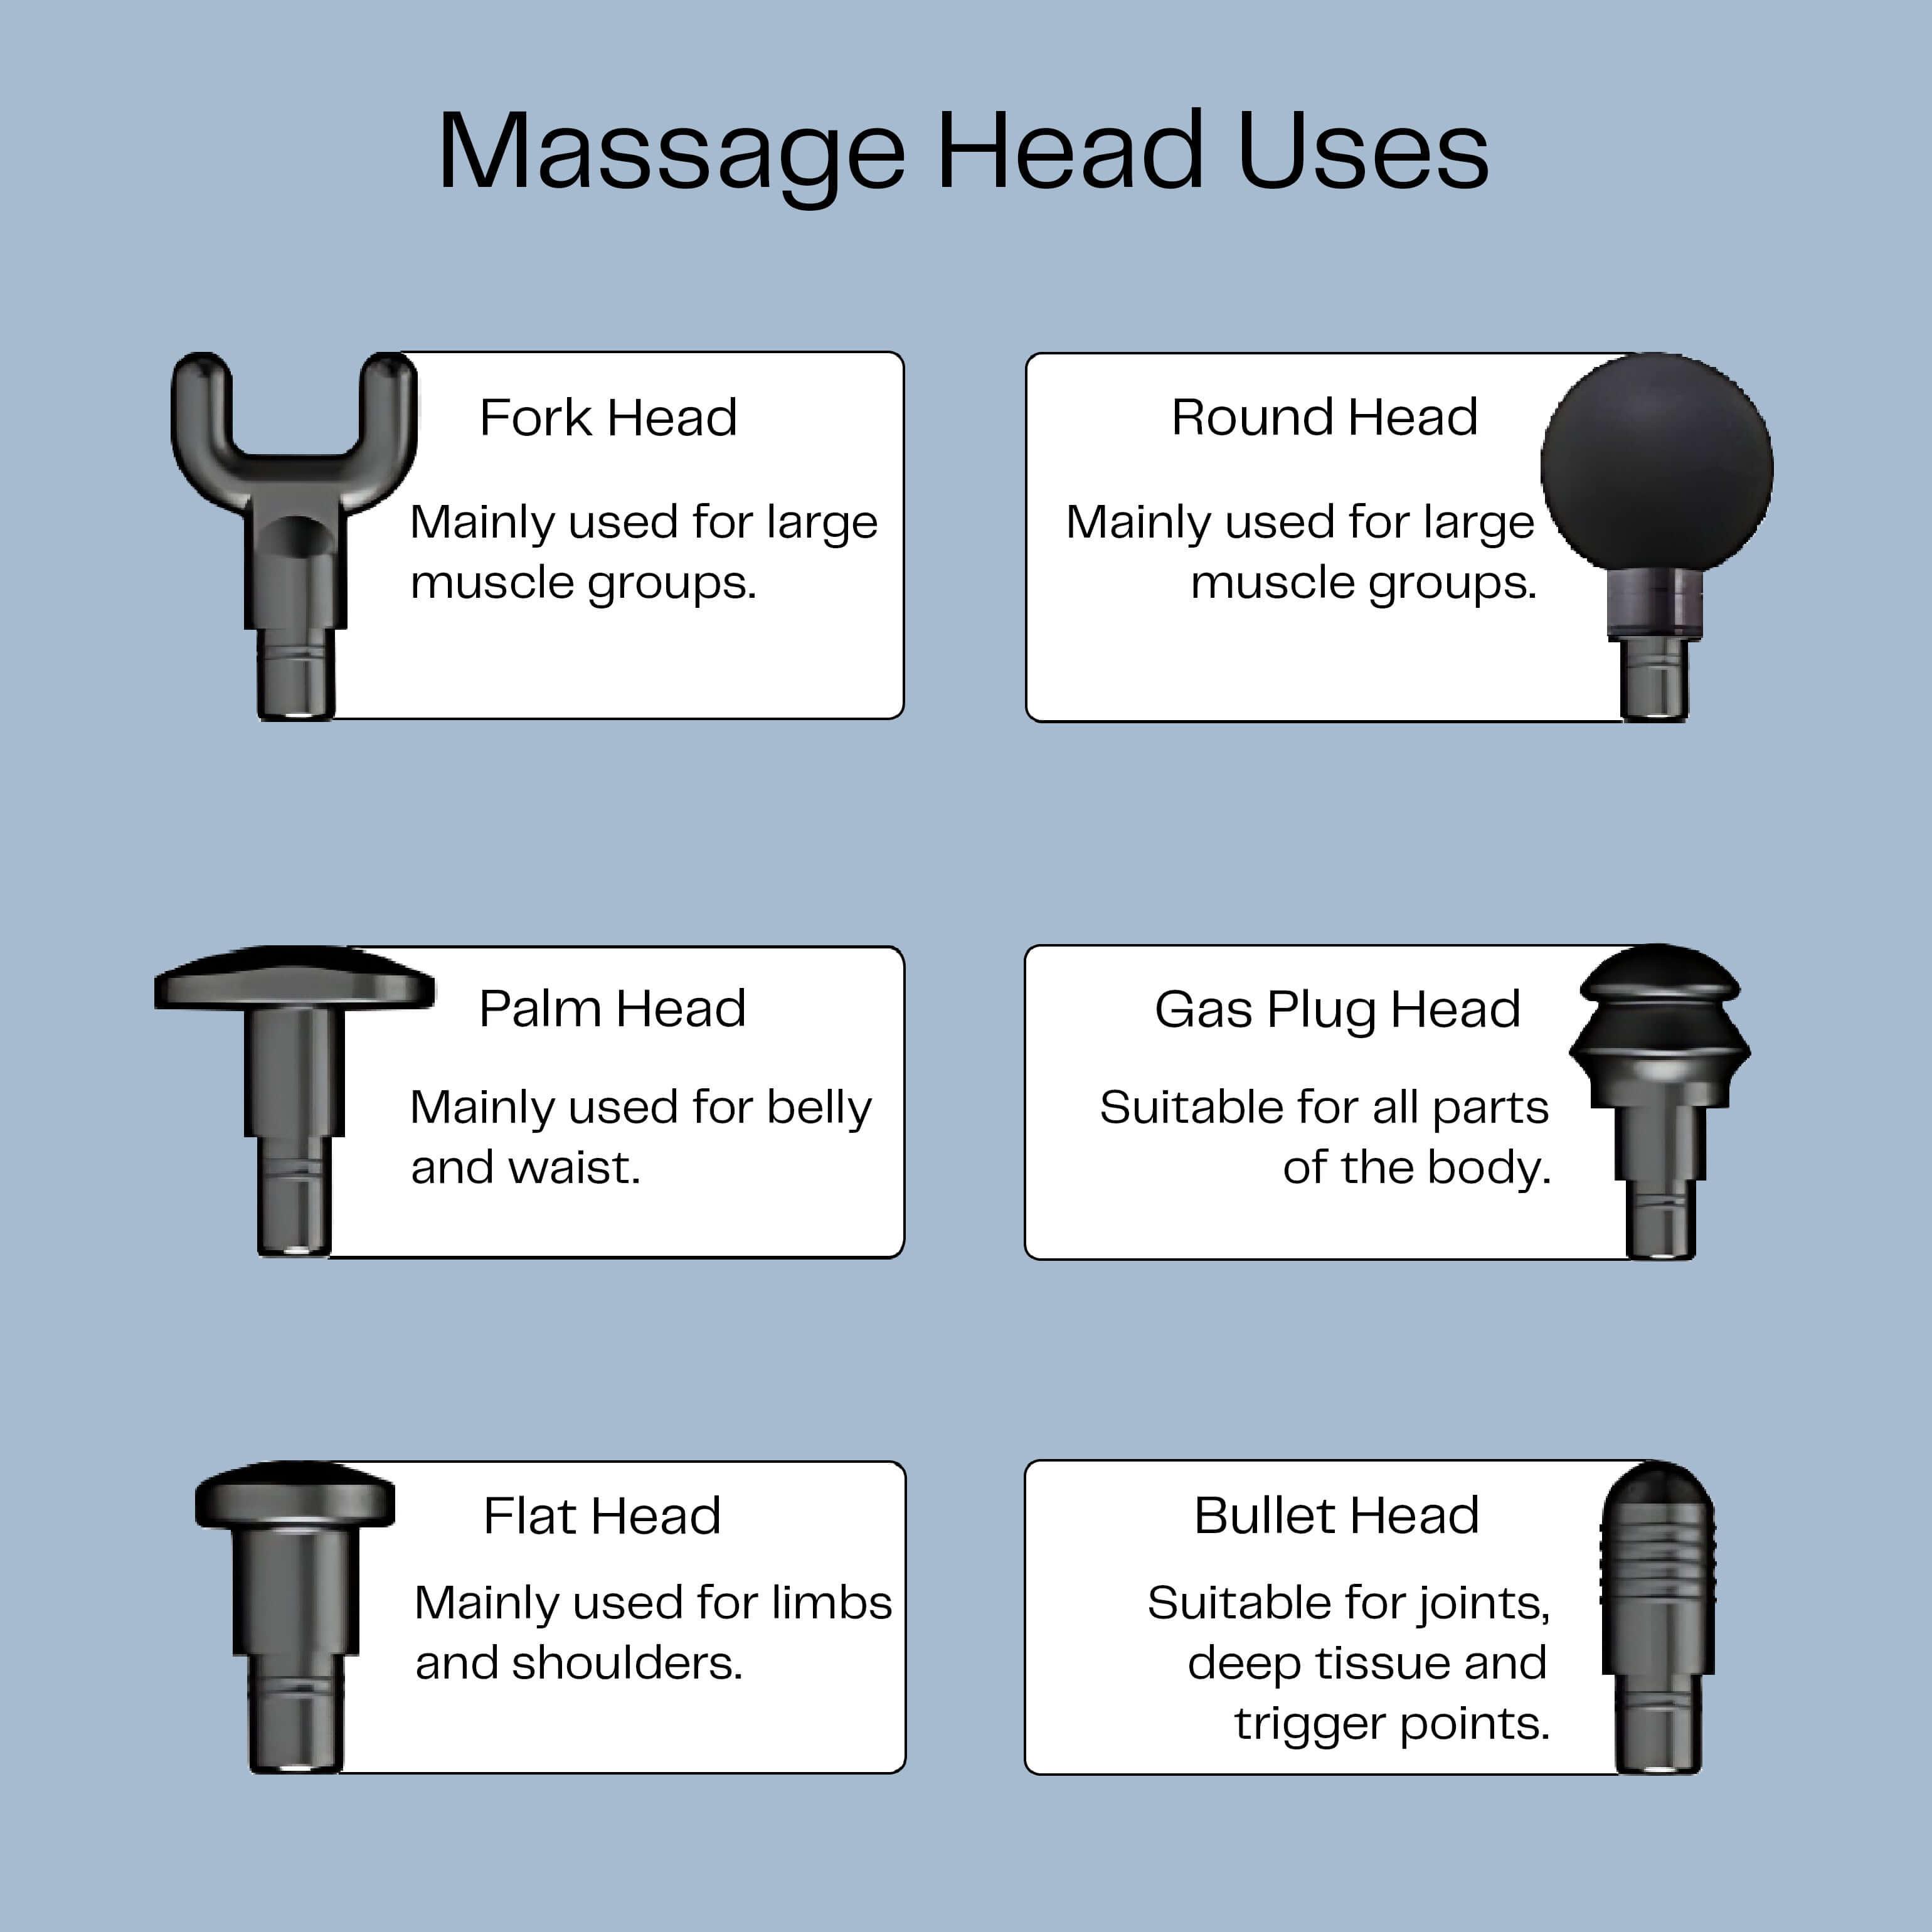 Six types of massage heads for handheld massage gun, including fork, round, palm, gas plug, flat, and bullet heads with their uses. best massage chair uae, massage chair Dubai, massage chair uae, massage chair Saudi Arabia, كرسي التدليك, Best massage chai